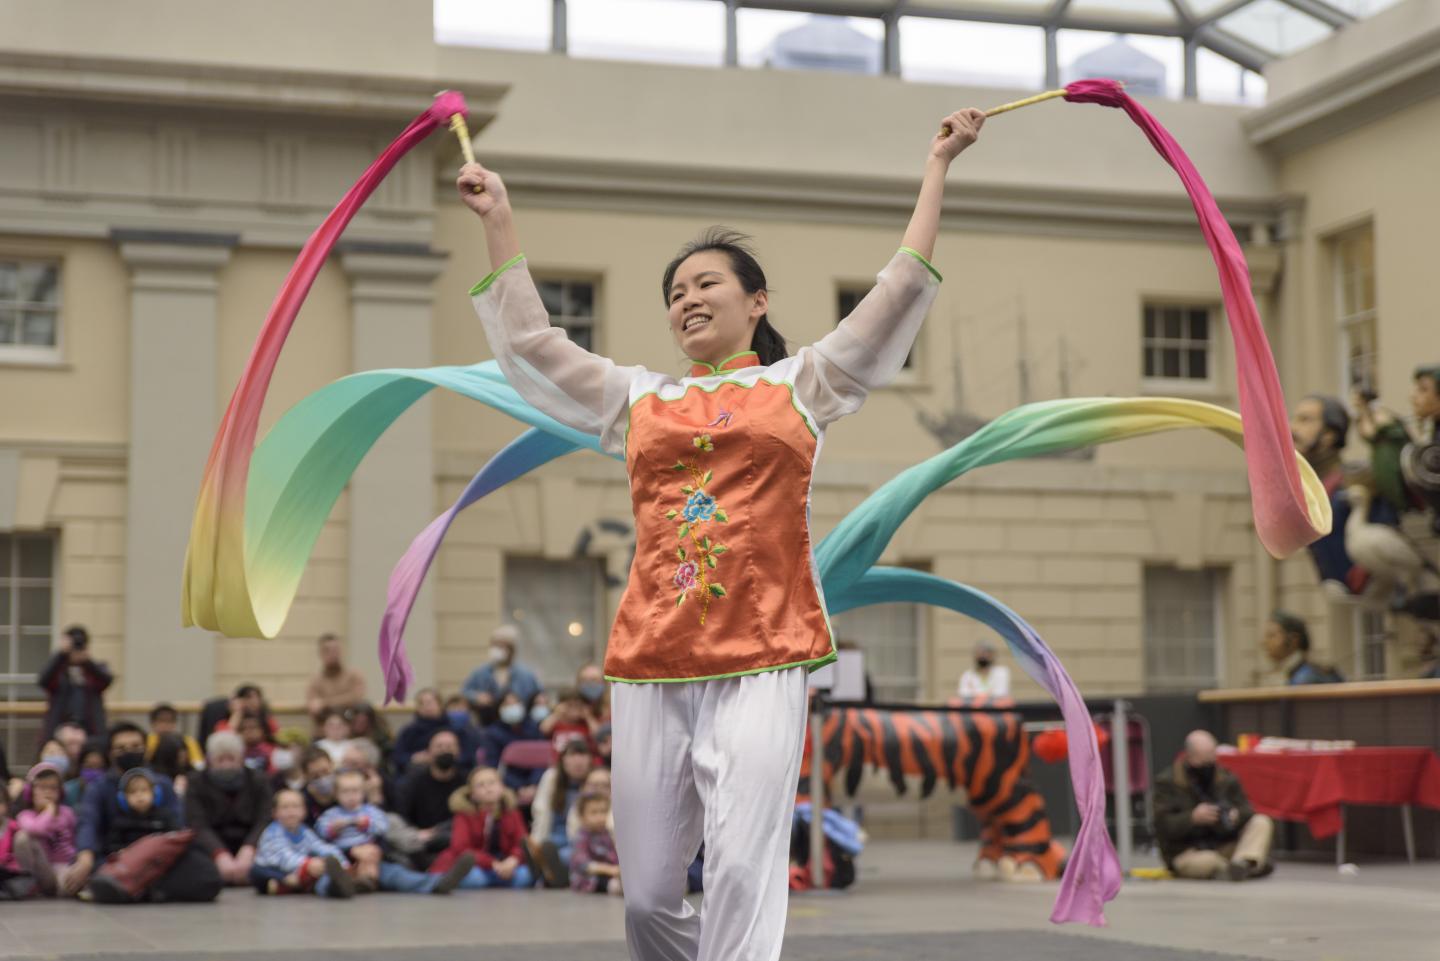 The image shows a woman performing a dance with ribbons in front of a crowd.